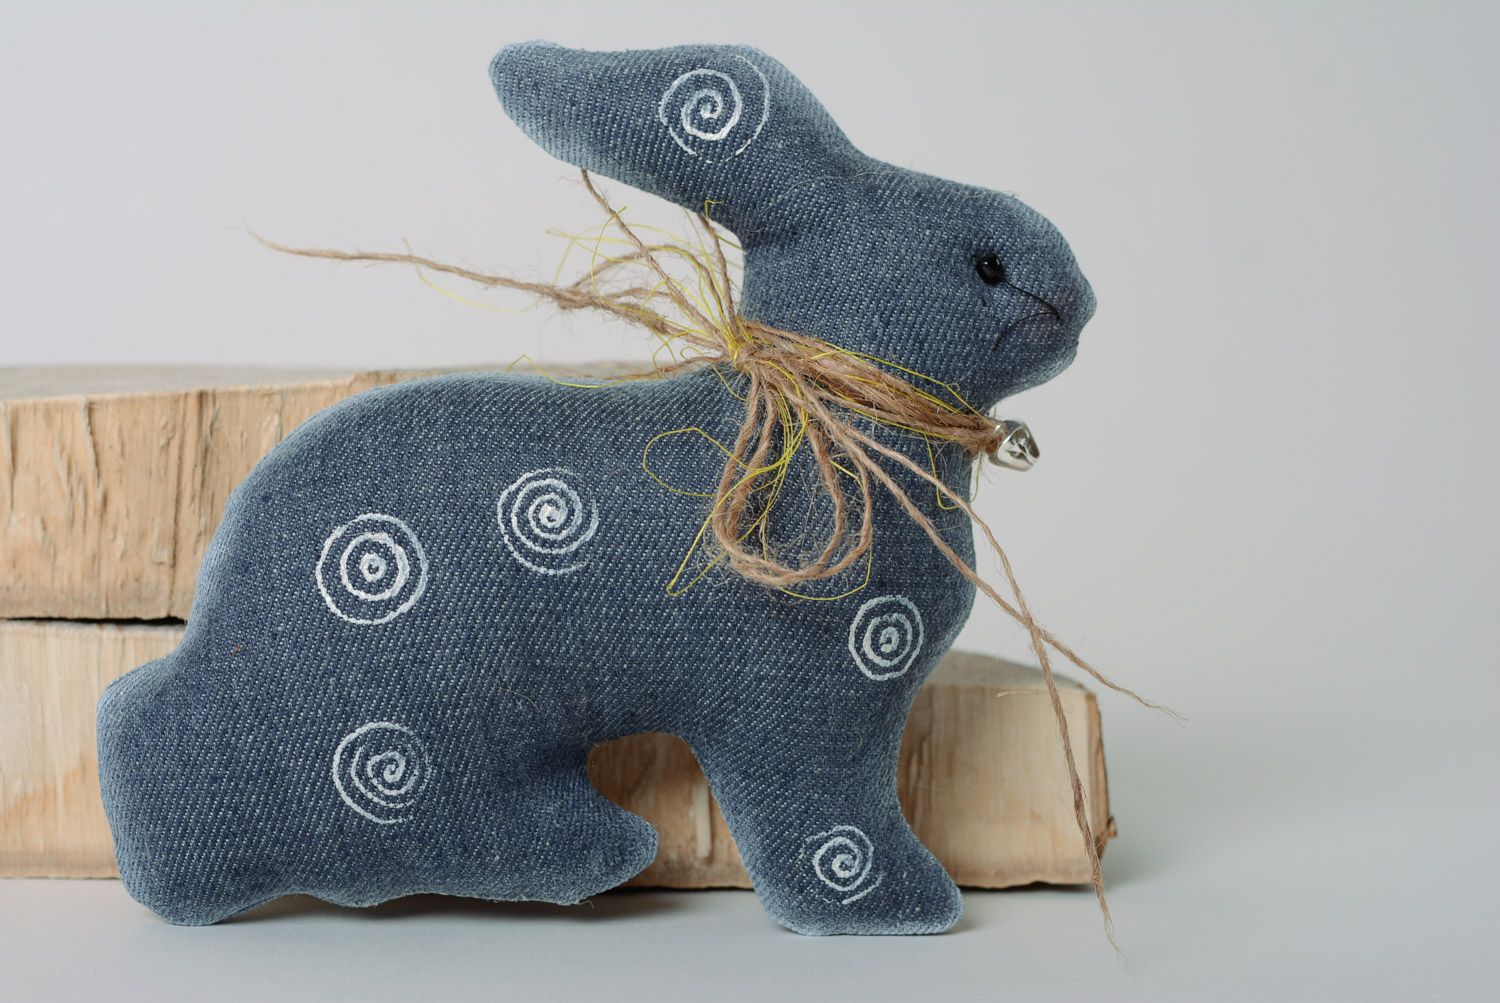 Handmade soft toy sewn of dark blue denim and painted with acrylics Rabbit photo 4